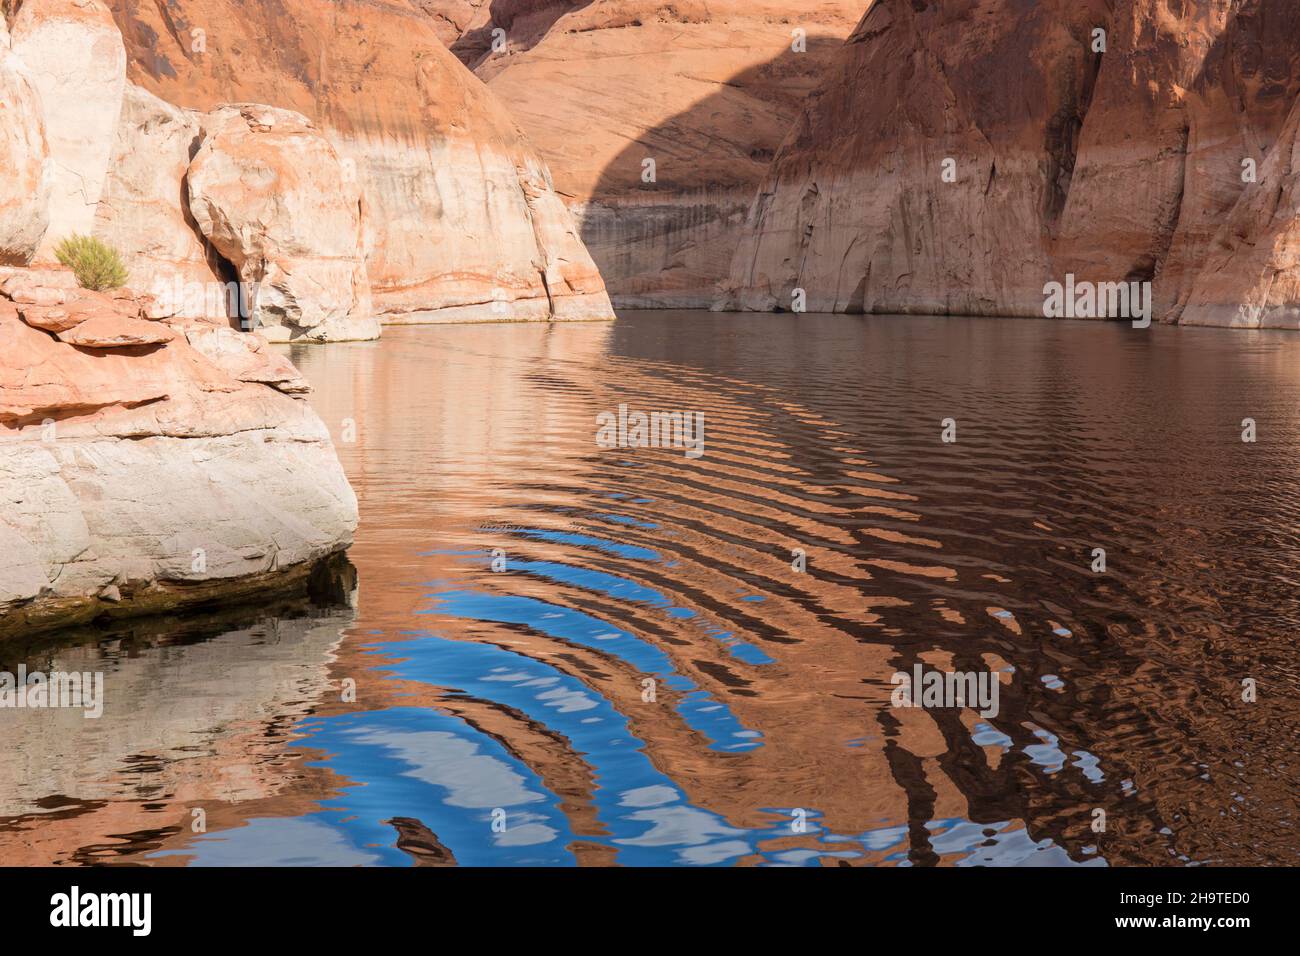 Glen Canyon National Recreation Area, Utah, USA. Sandstone cliffs reflected in the rippled waters of Bridge Canyon, a narrow arm of Lake Powell. Stock Photo